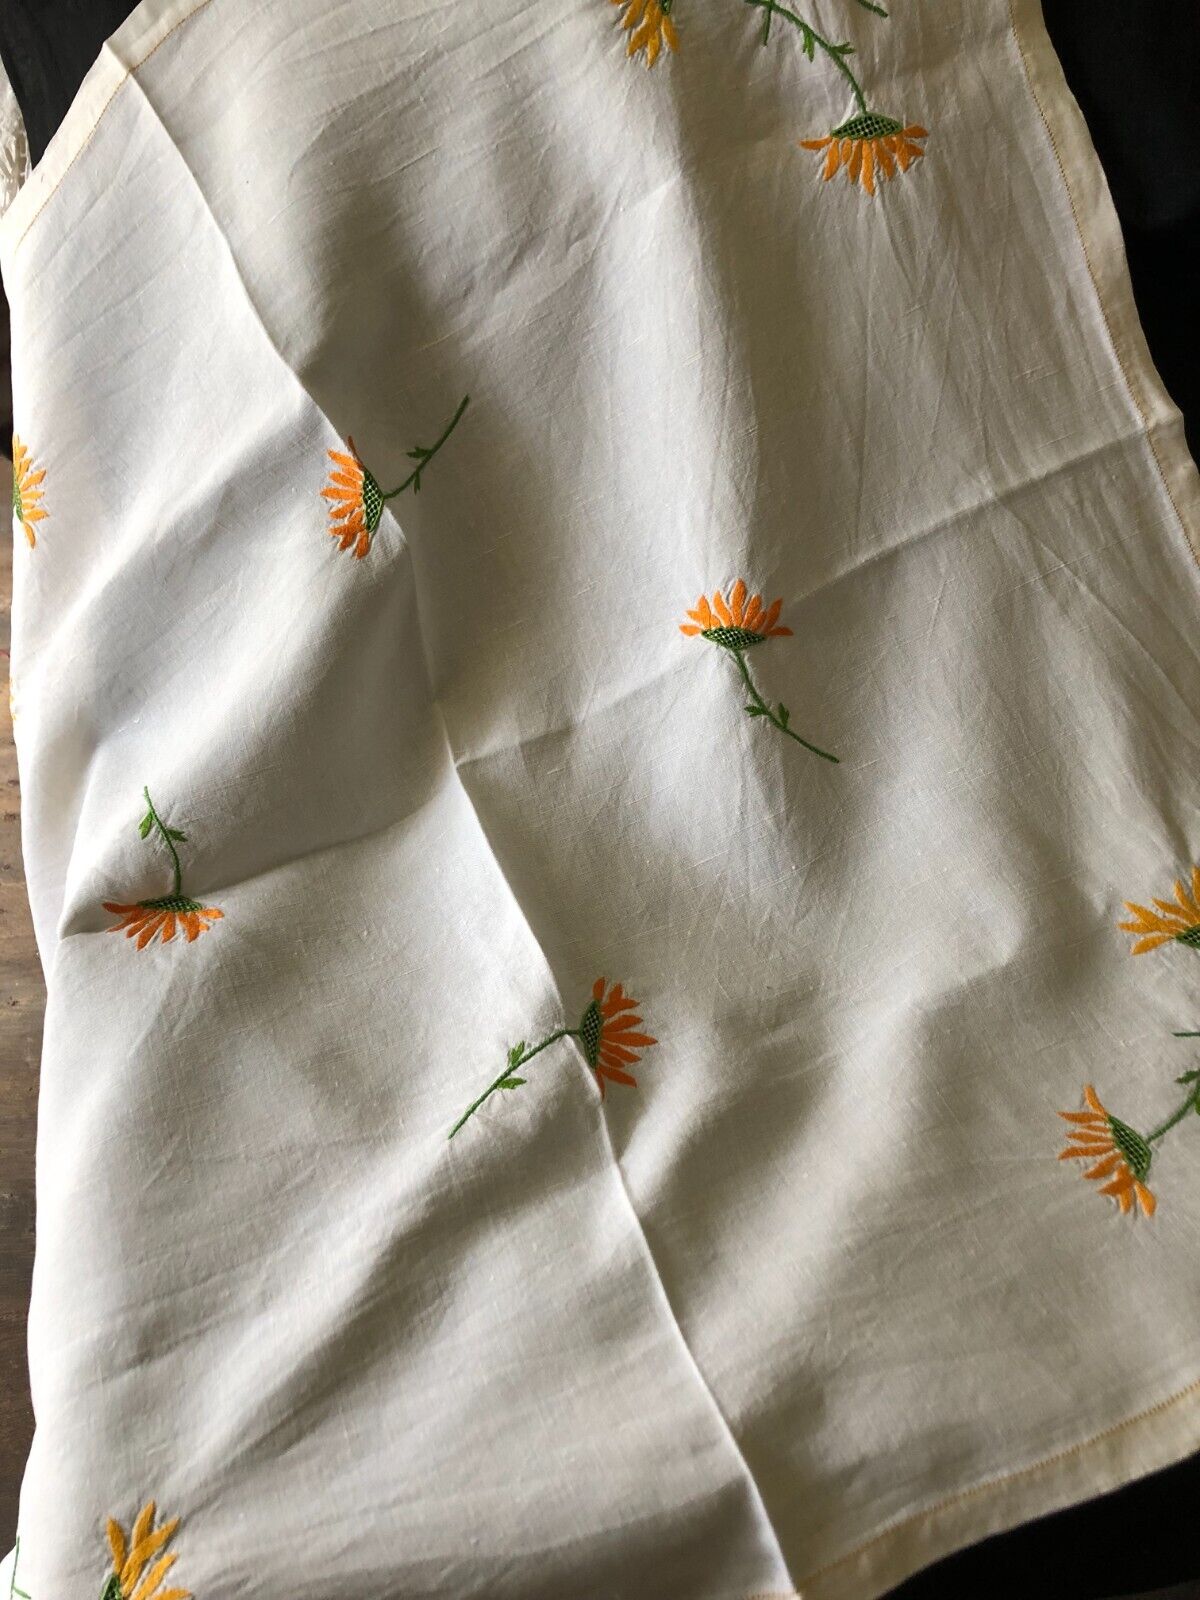 Vintage French Square Linen Embroidered Yellow/Orange Sunflowers Tablecloth